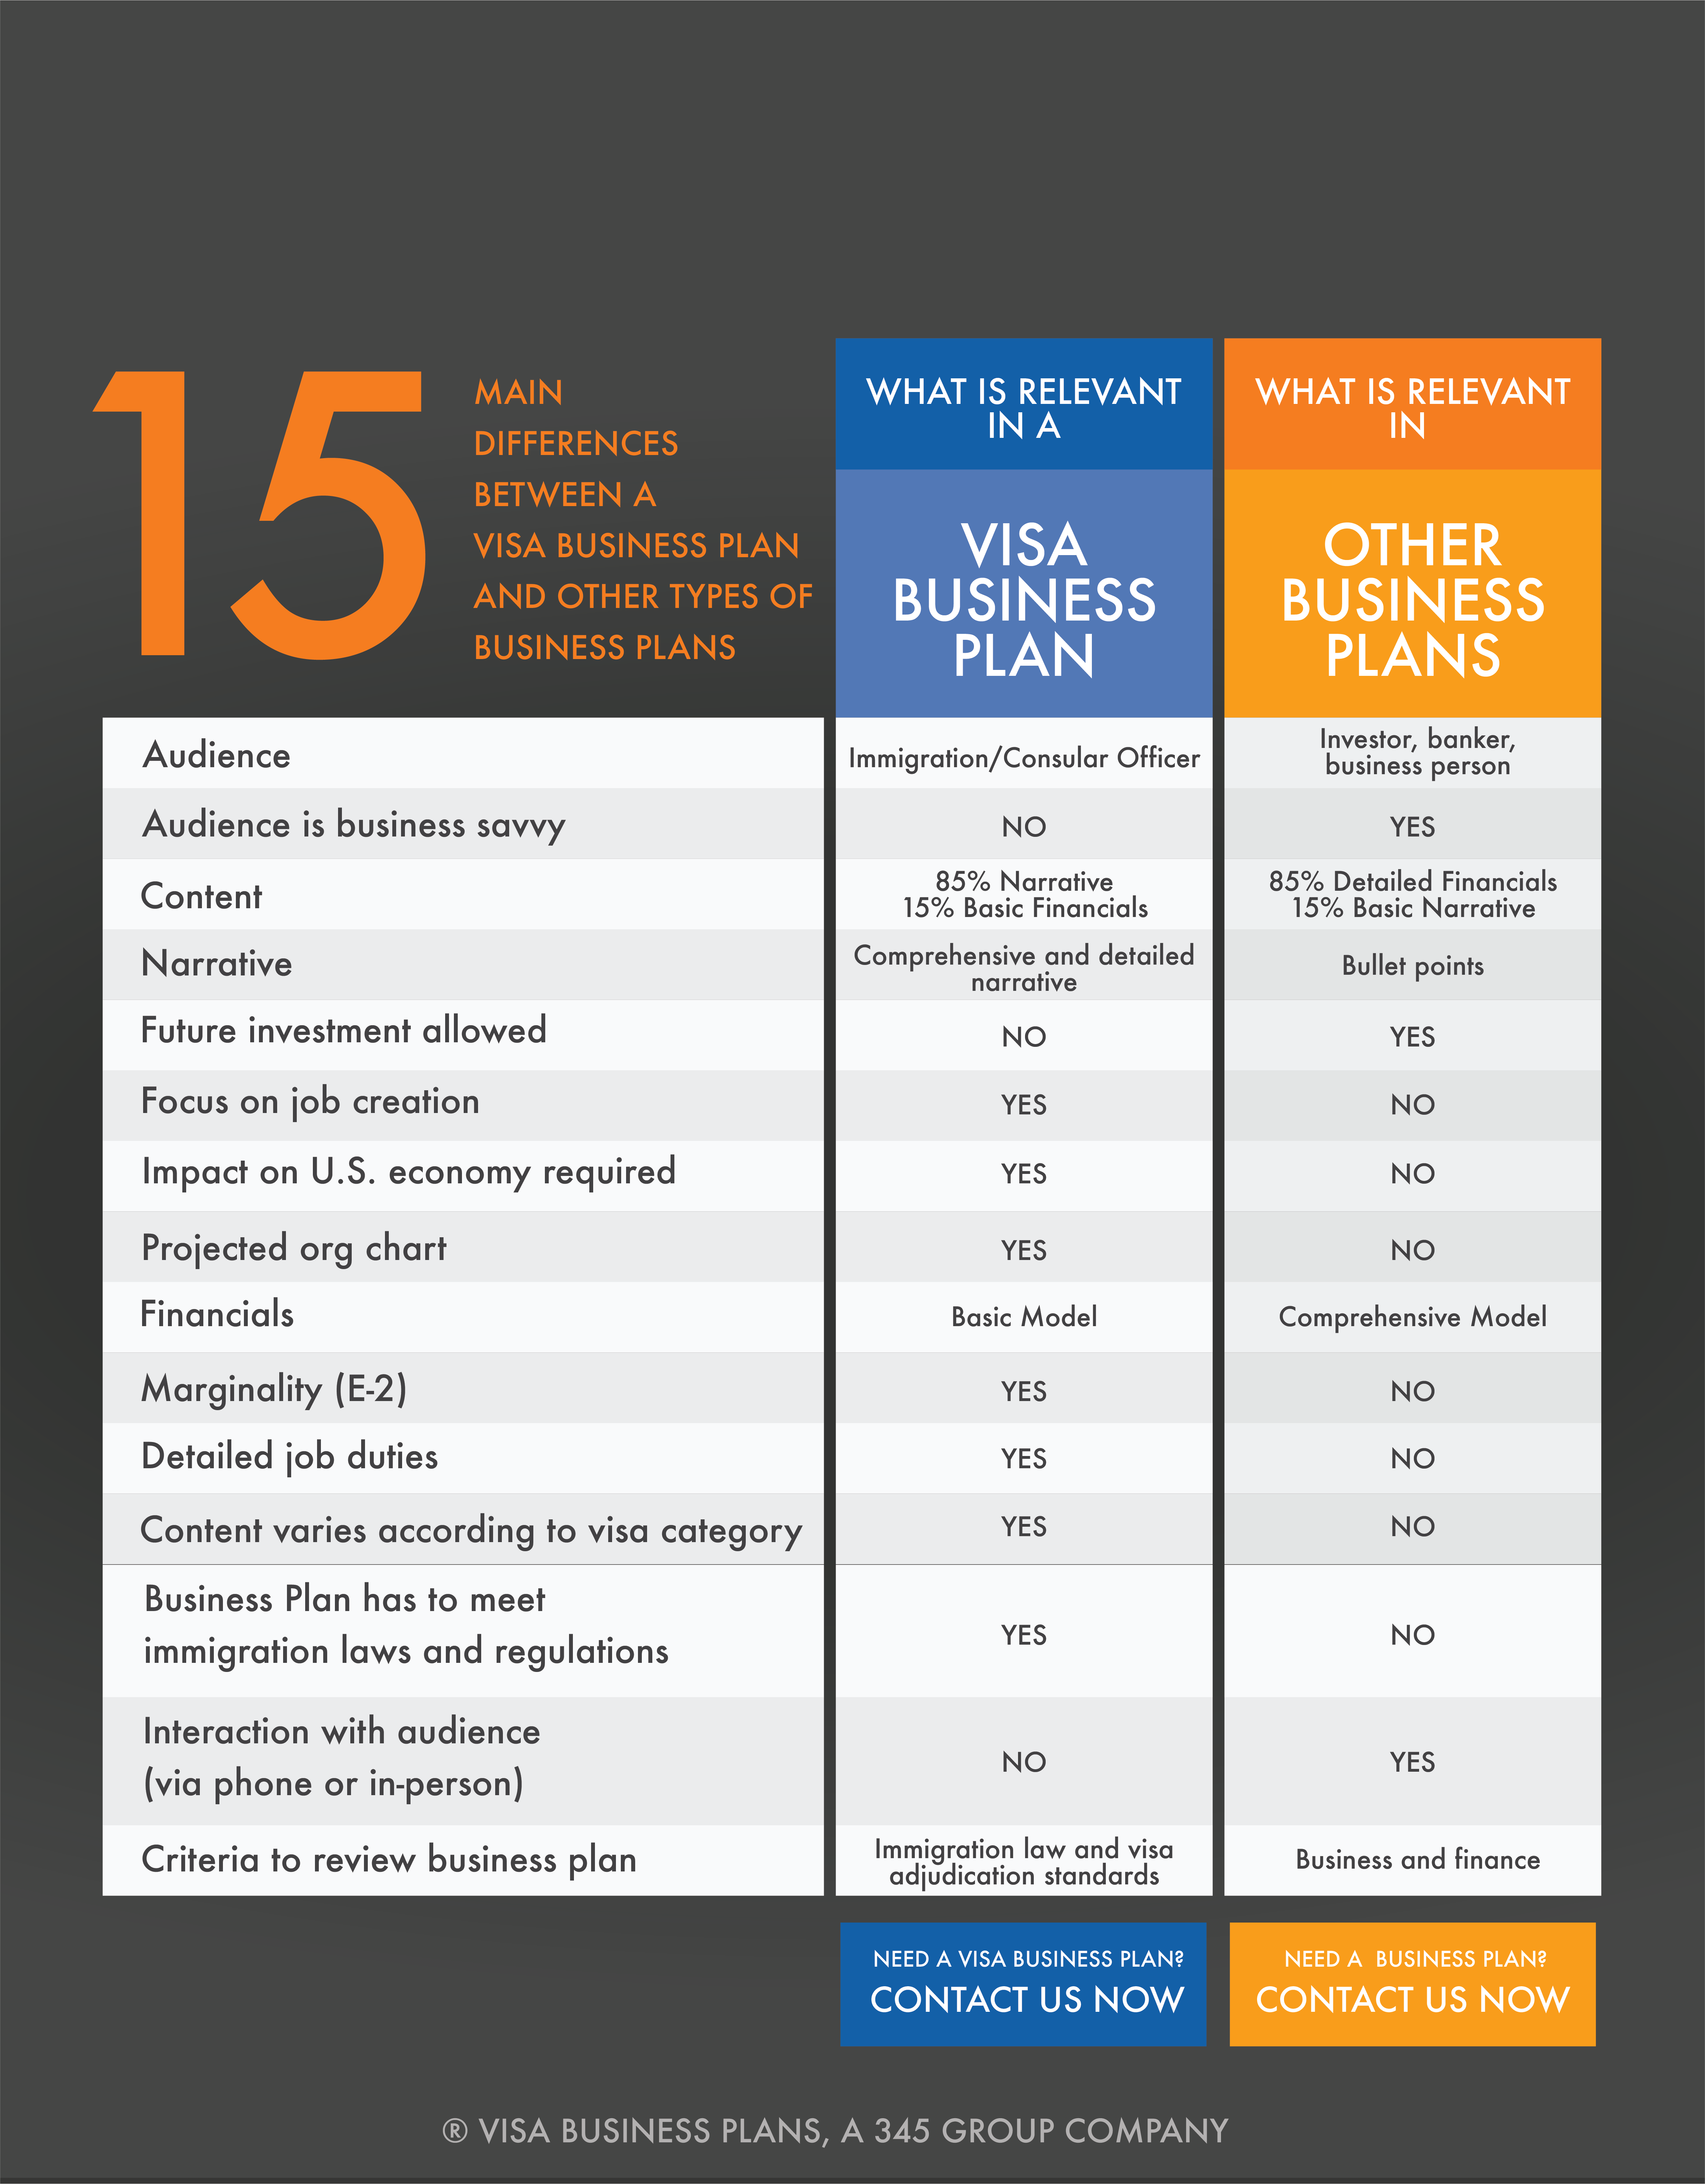 Immigration Business Plan vs. Other Business Plans graphic